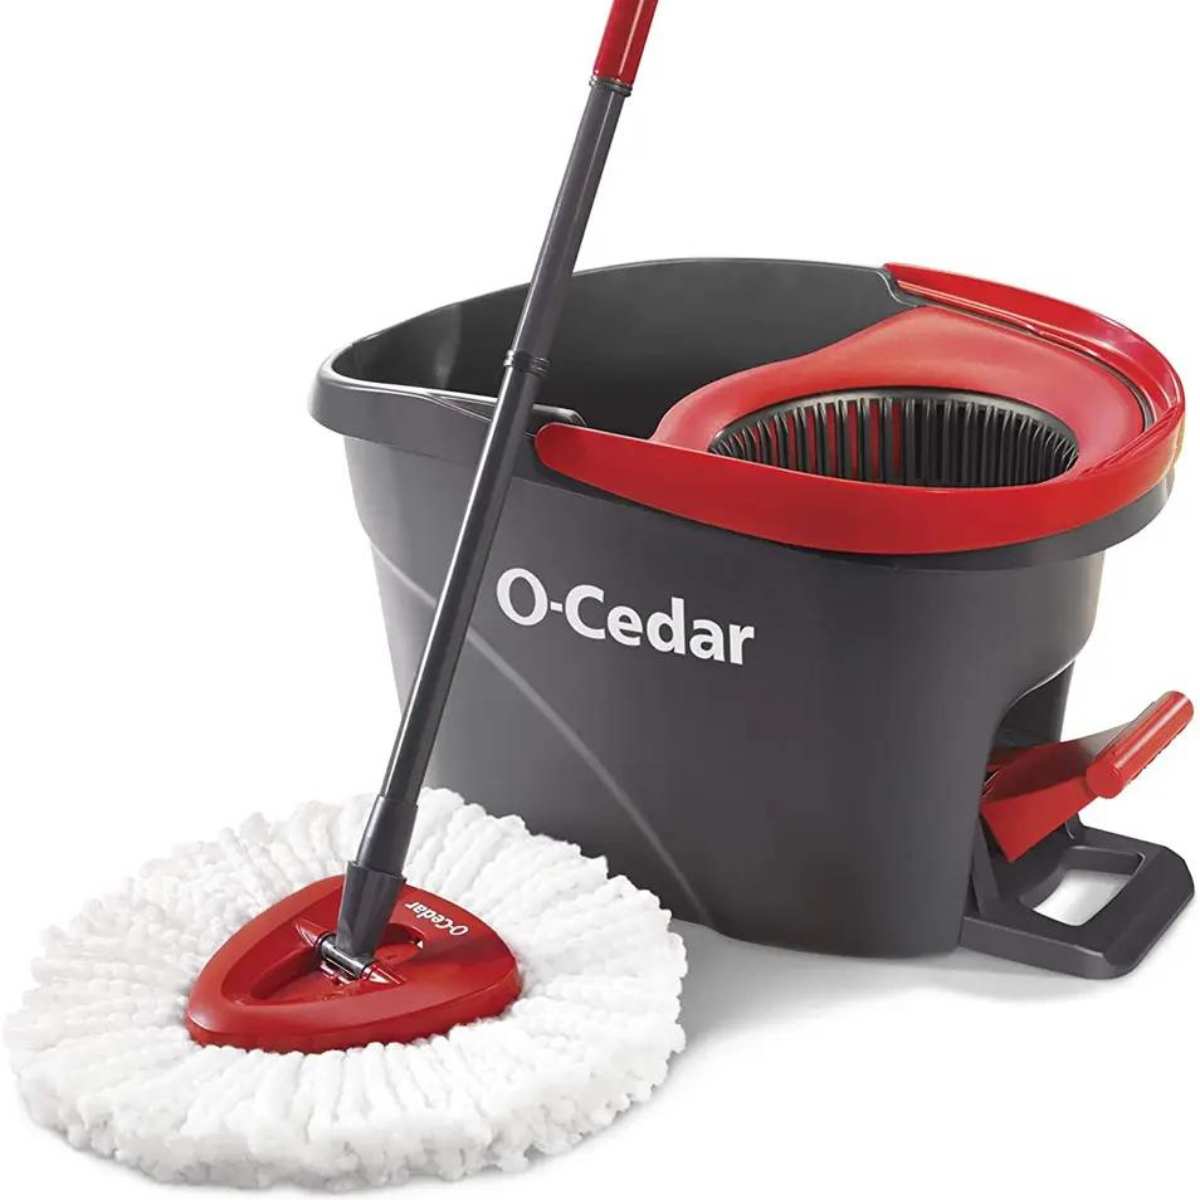 Spin Mop Bucket System, Detachable Spinning Basket and Easy Wring